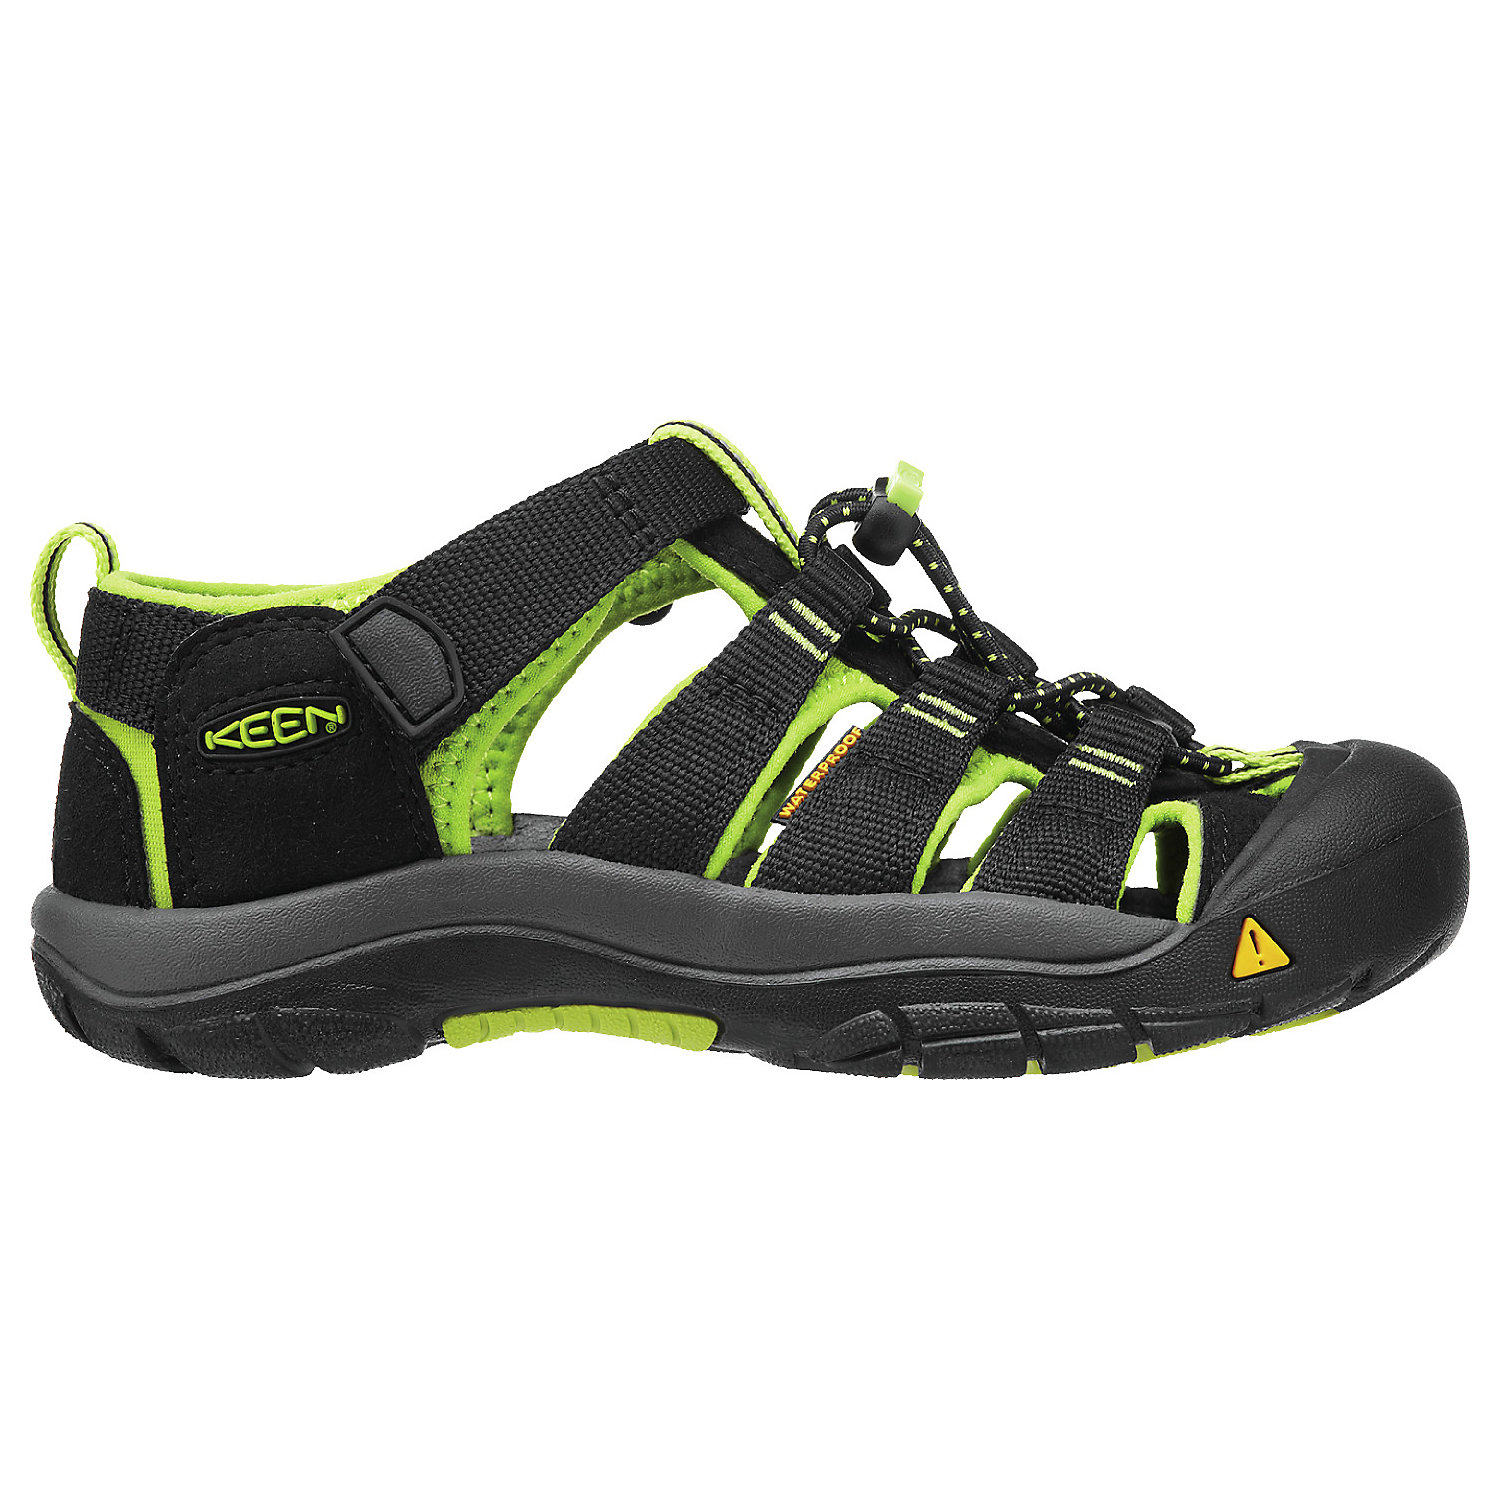 KEEN Youth Newport H2 Water Sandals with Toe Protection and Quick Dry